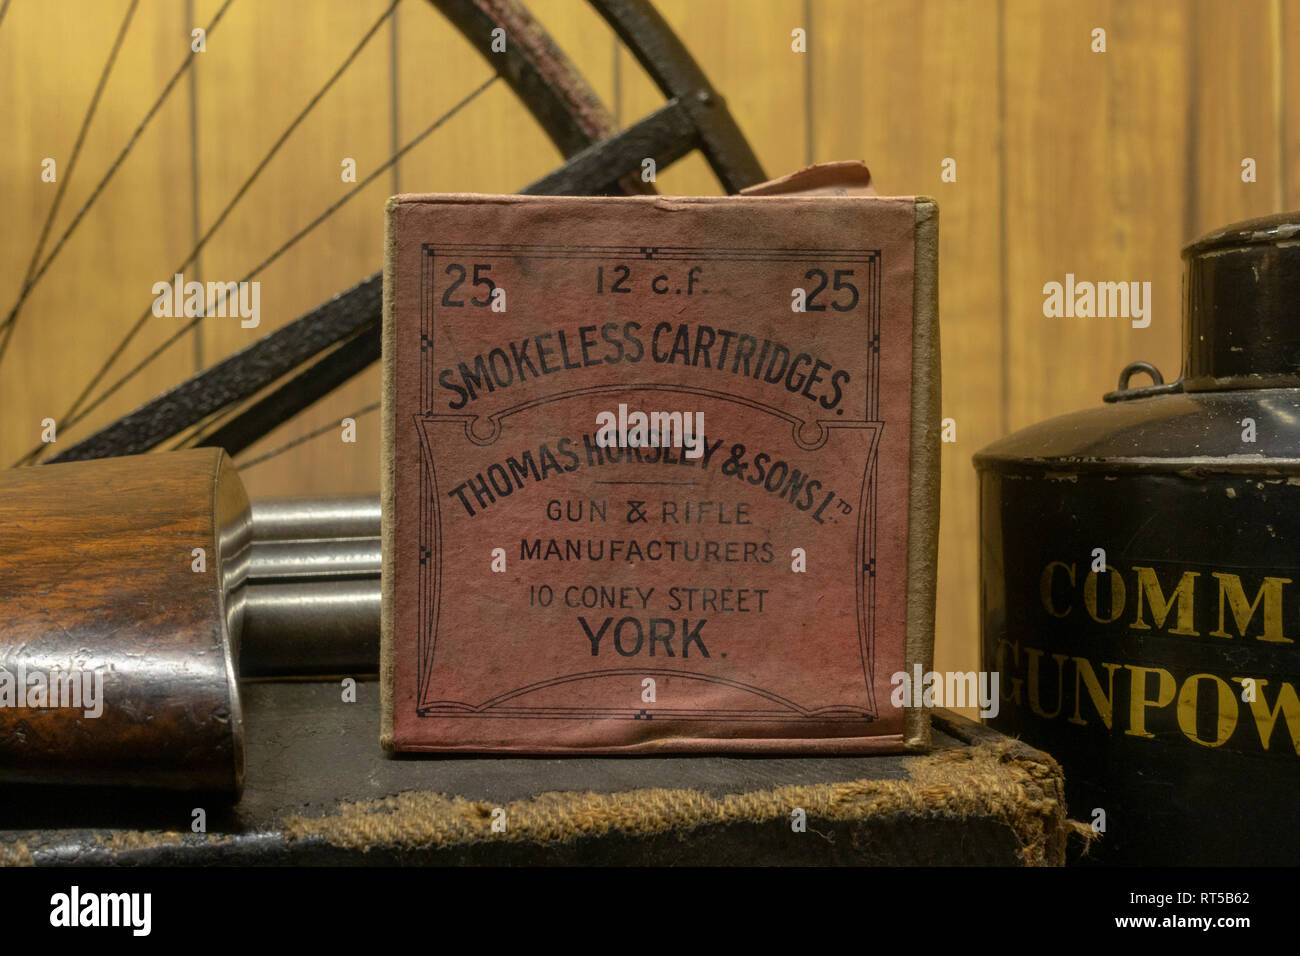 A box of smokeless cartridges made by Thomas Horsley & Sons Ltd in Coney Street York on display in the York Castle Museum, York, Yorkshire, UK. Stock Photo